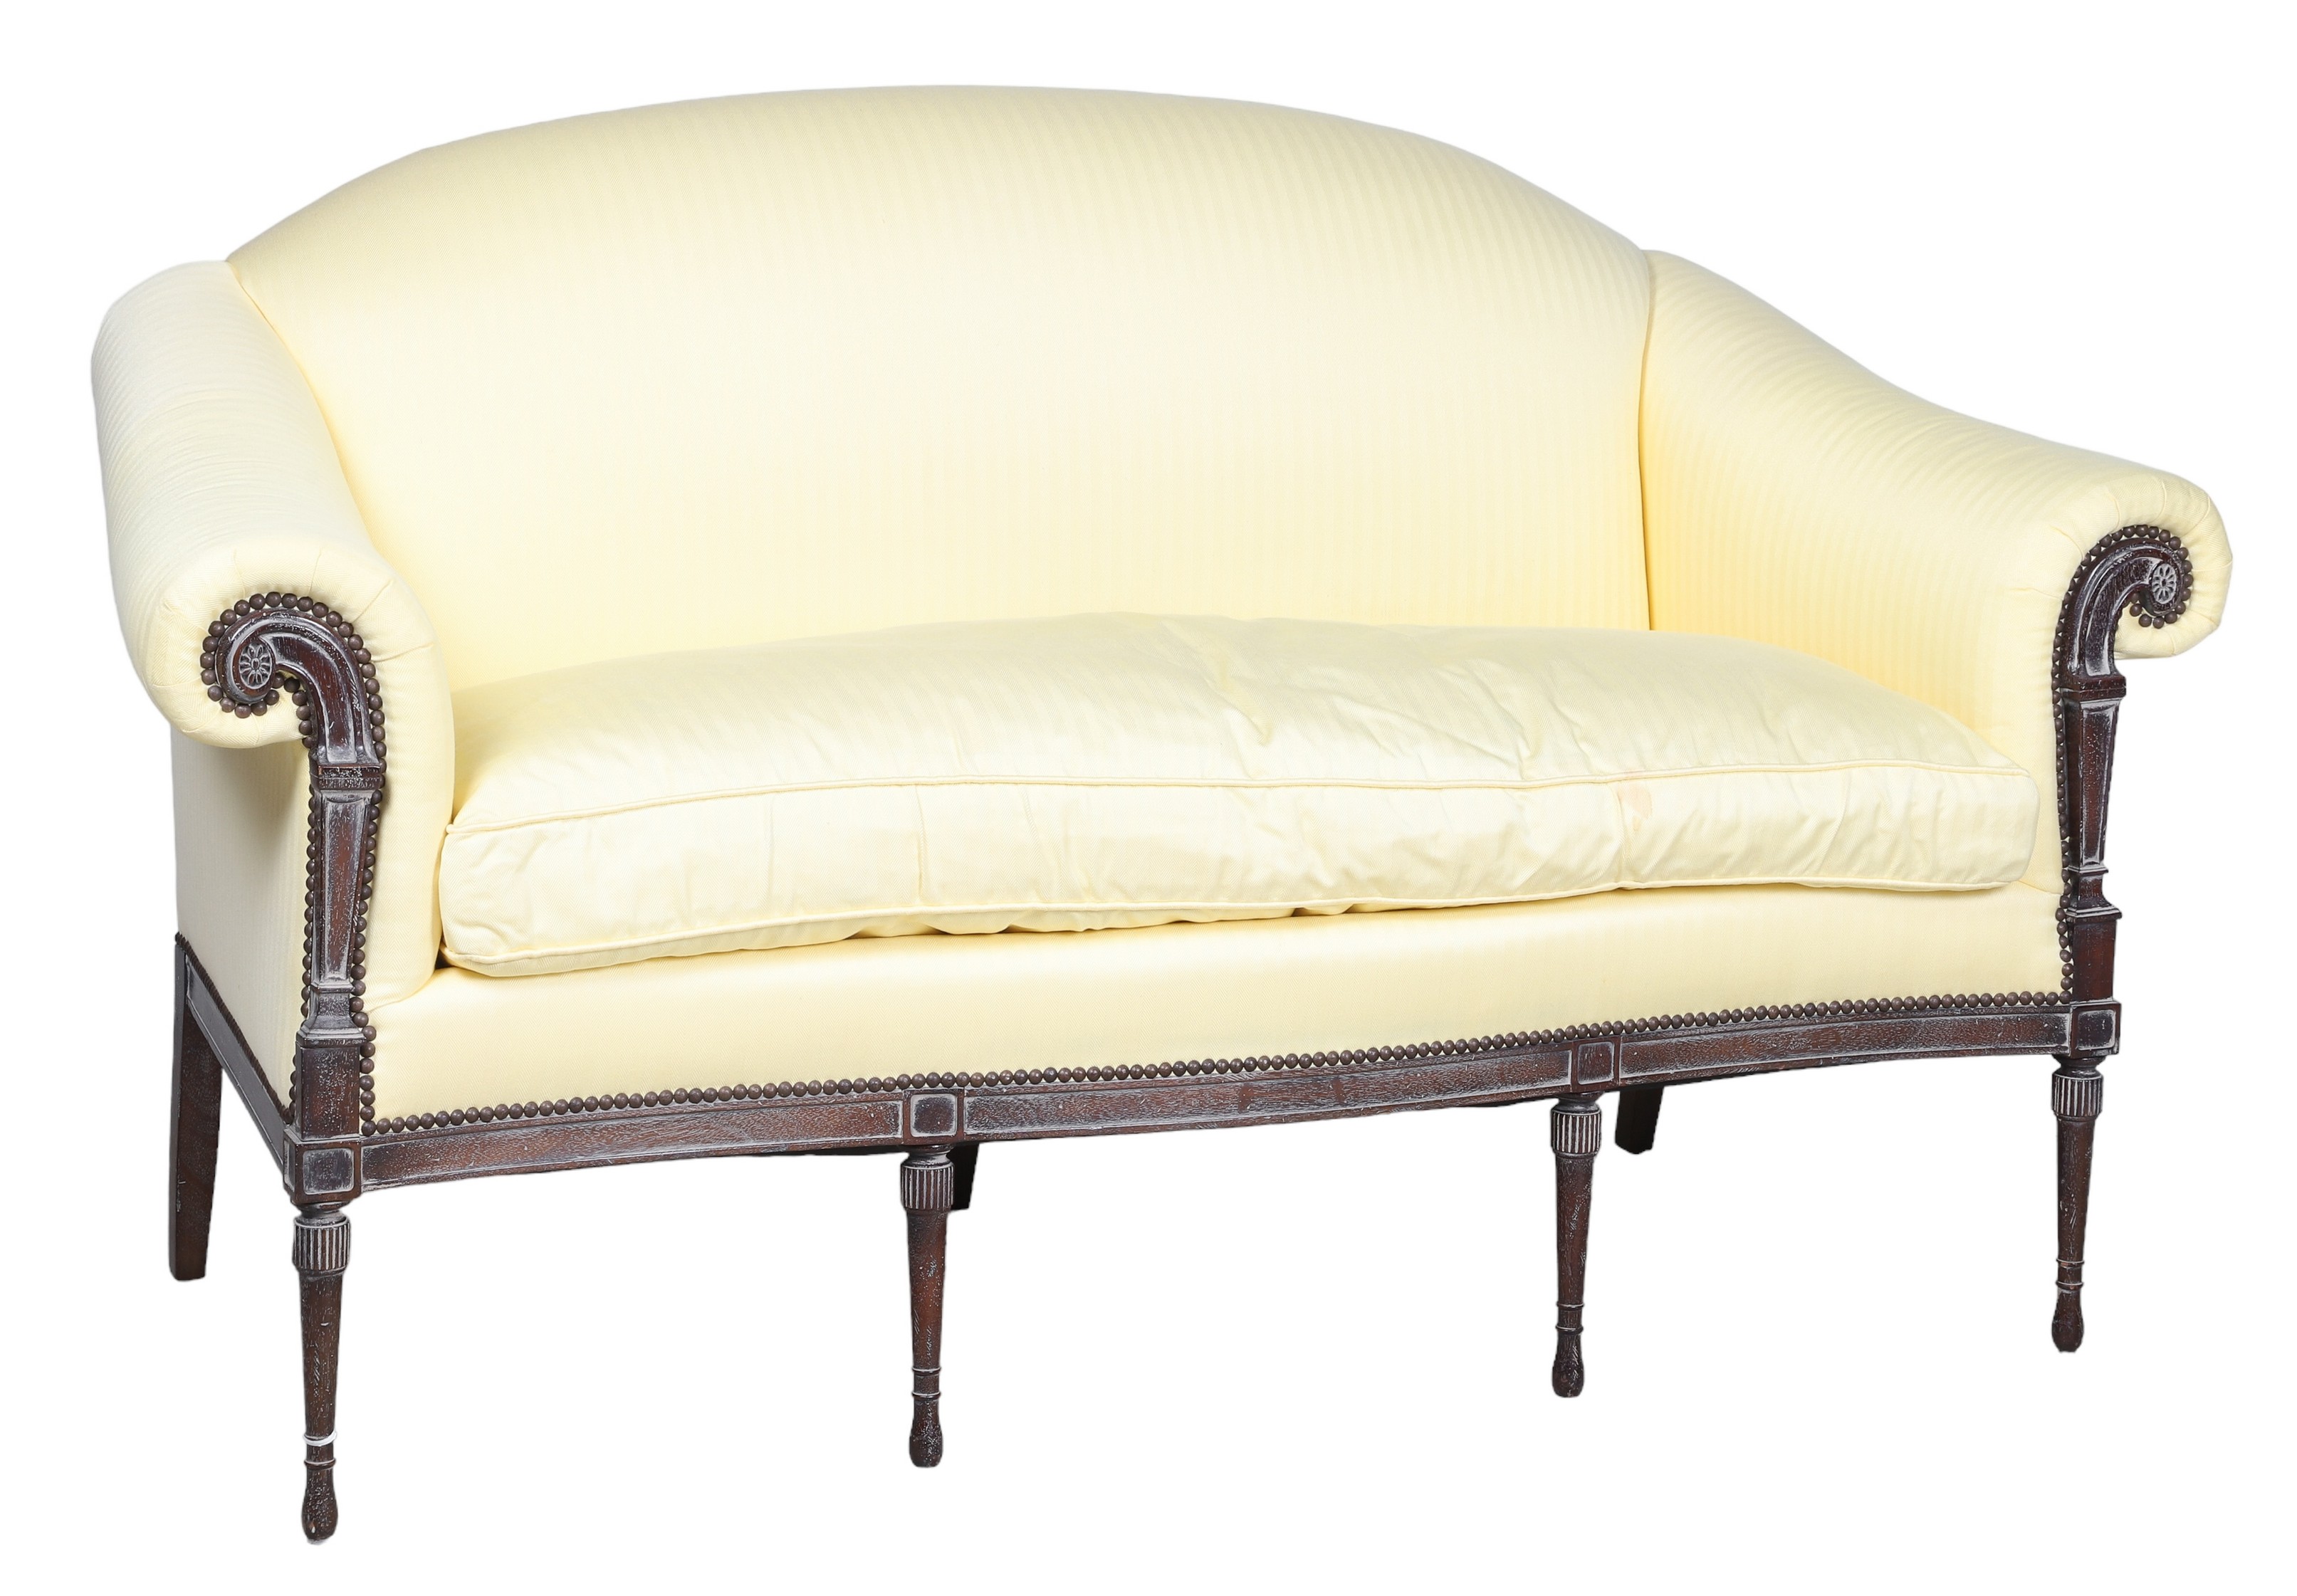 EJ Victor upholstered settee yellow 2e121c